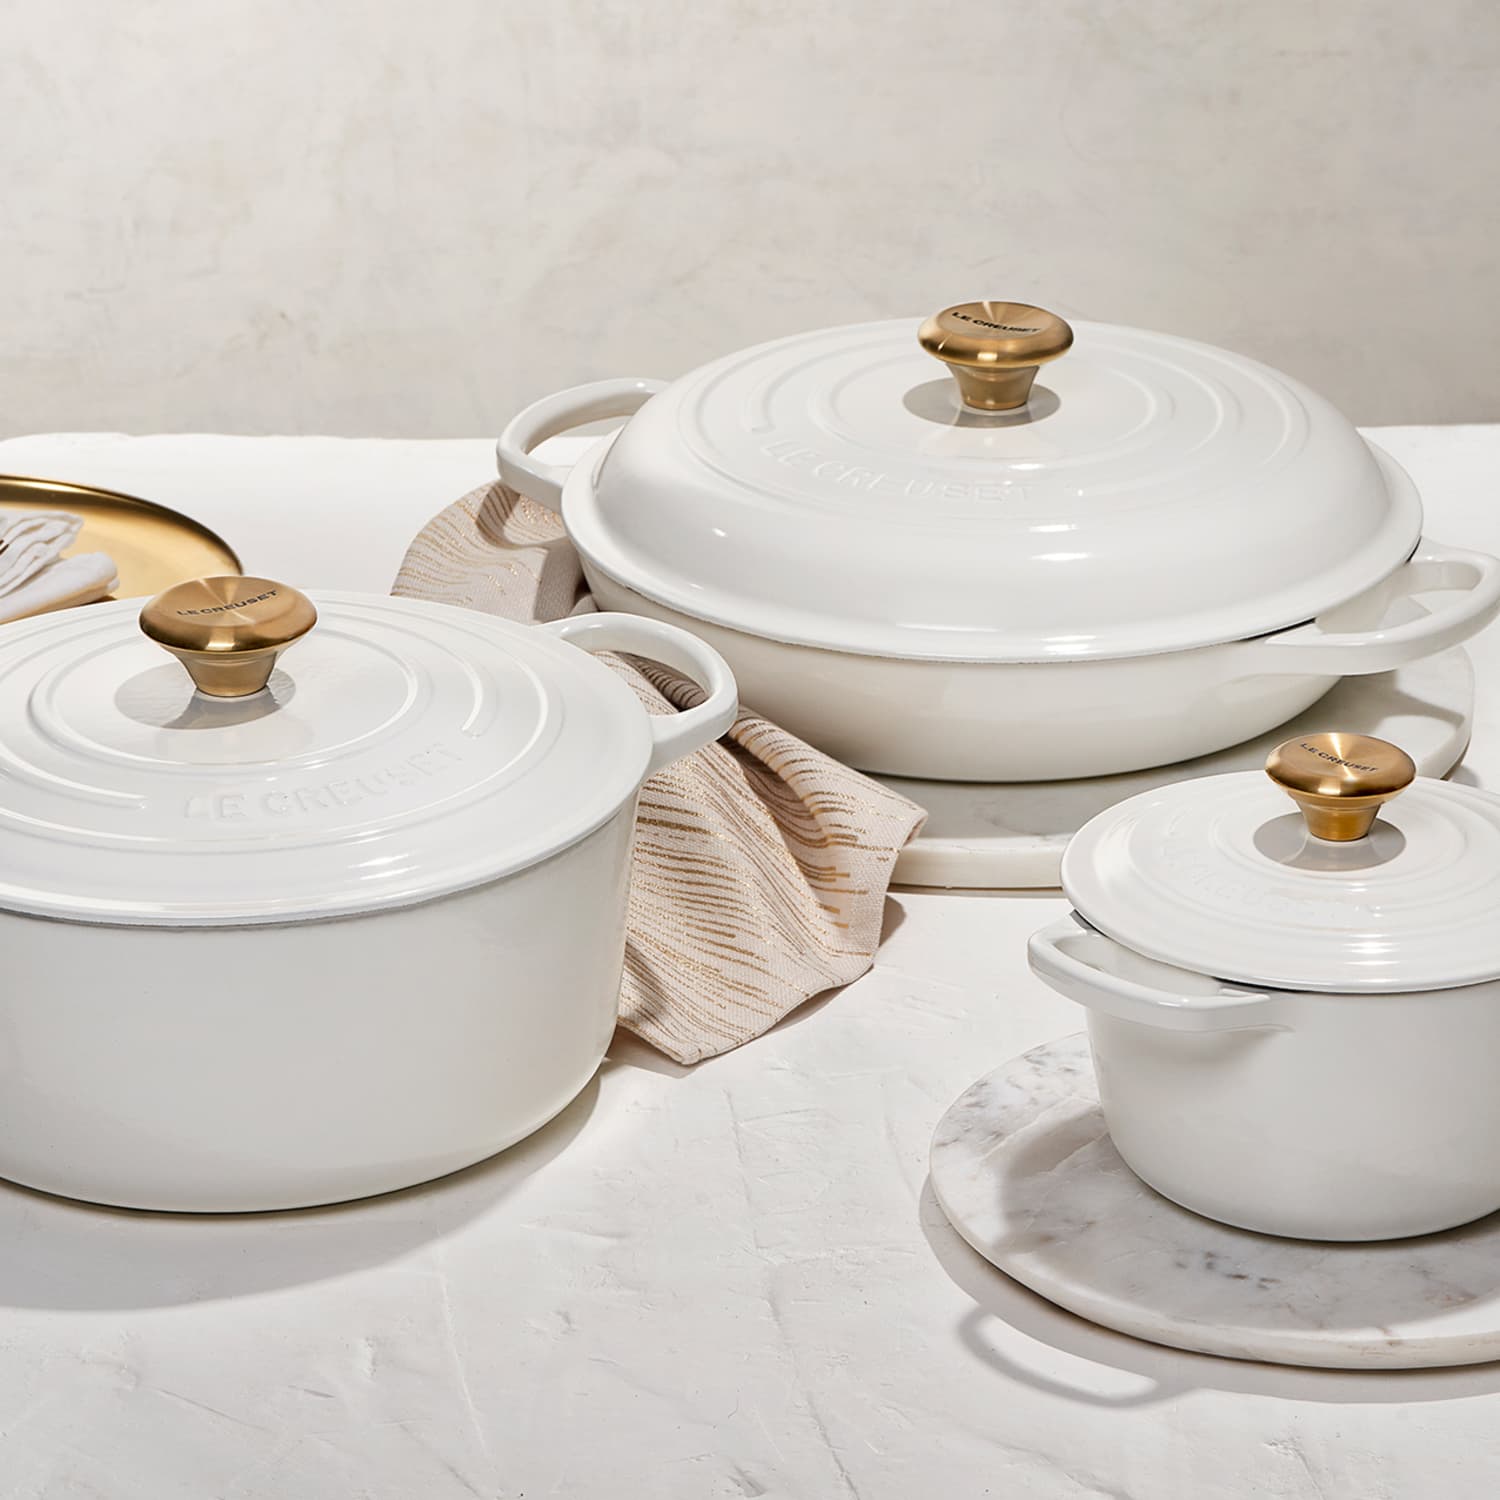 Le Creuset All-White Collection With Golden Knobs Has Launched